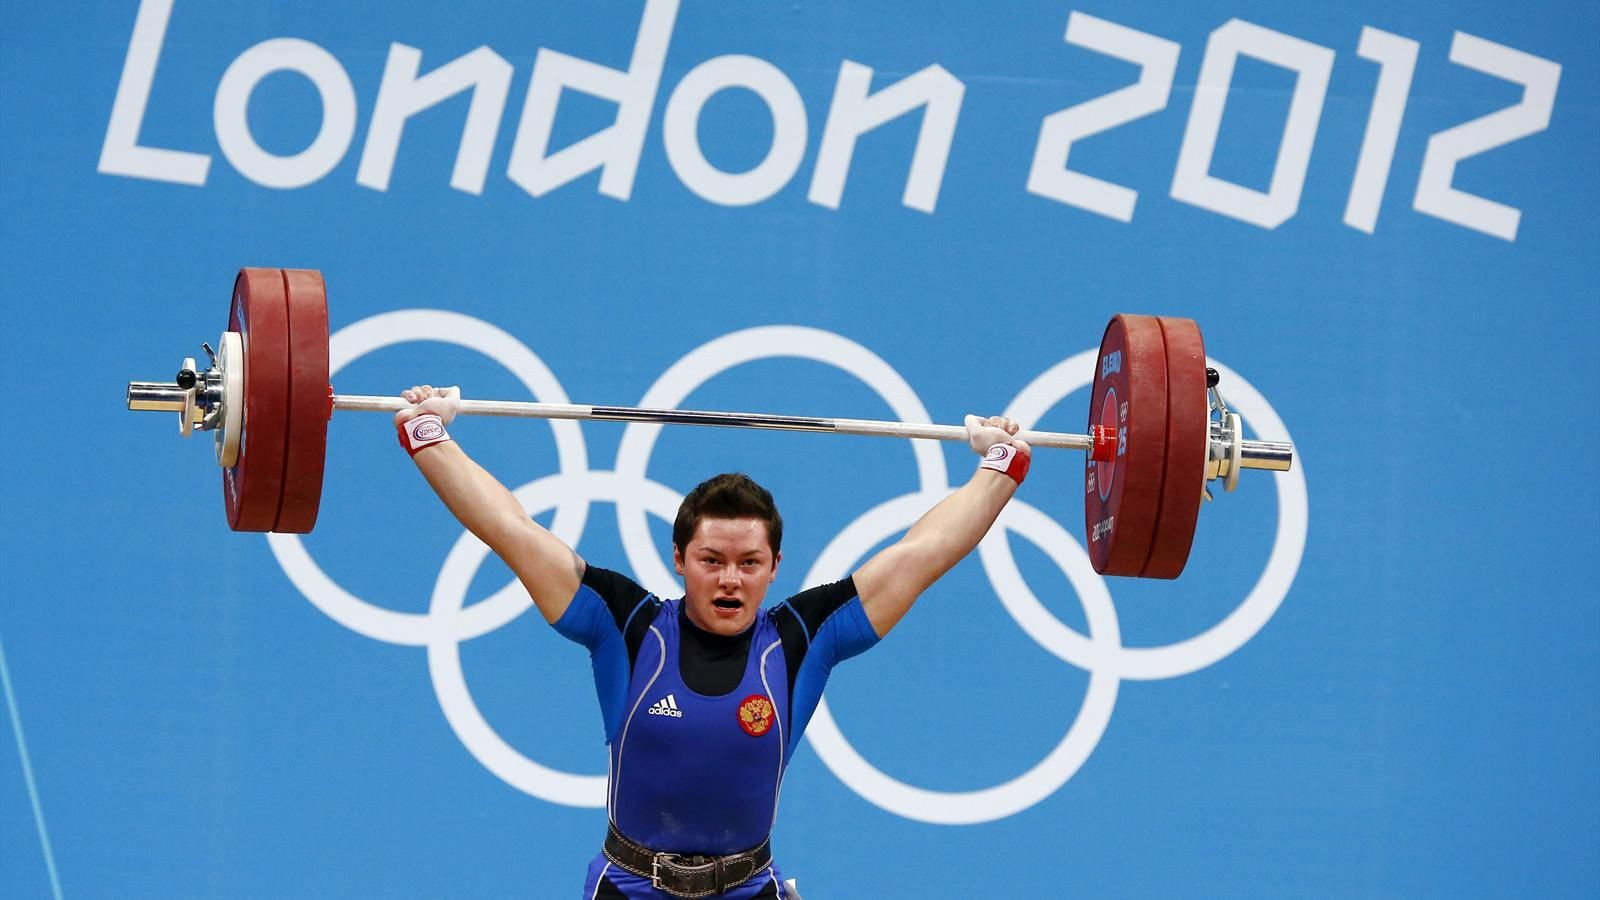 Matthew Curtain had been in charge of weightlifting and powerlifting at London 2012 ©Getty Images